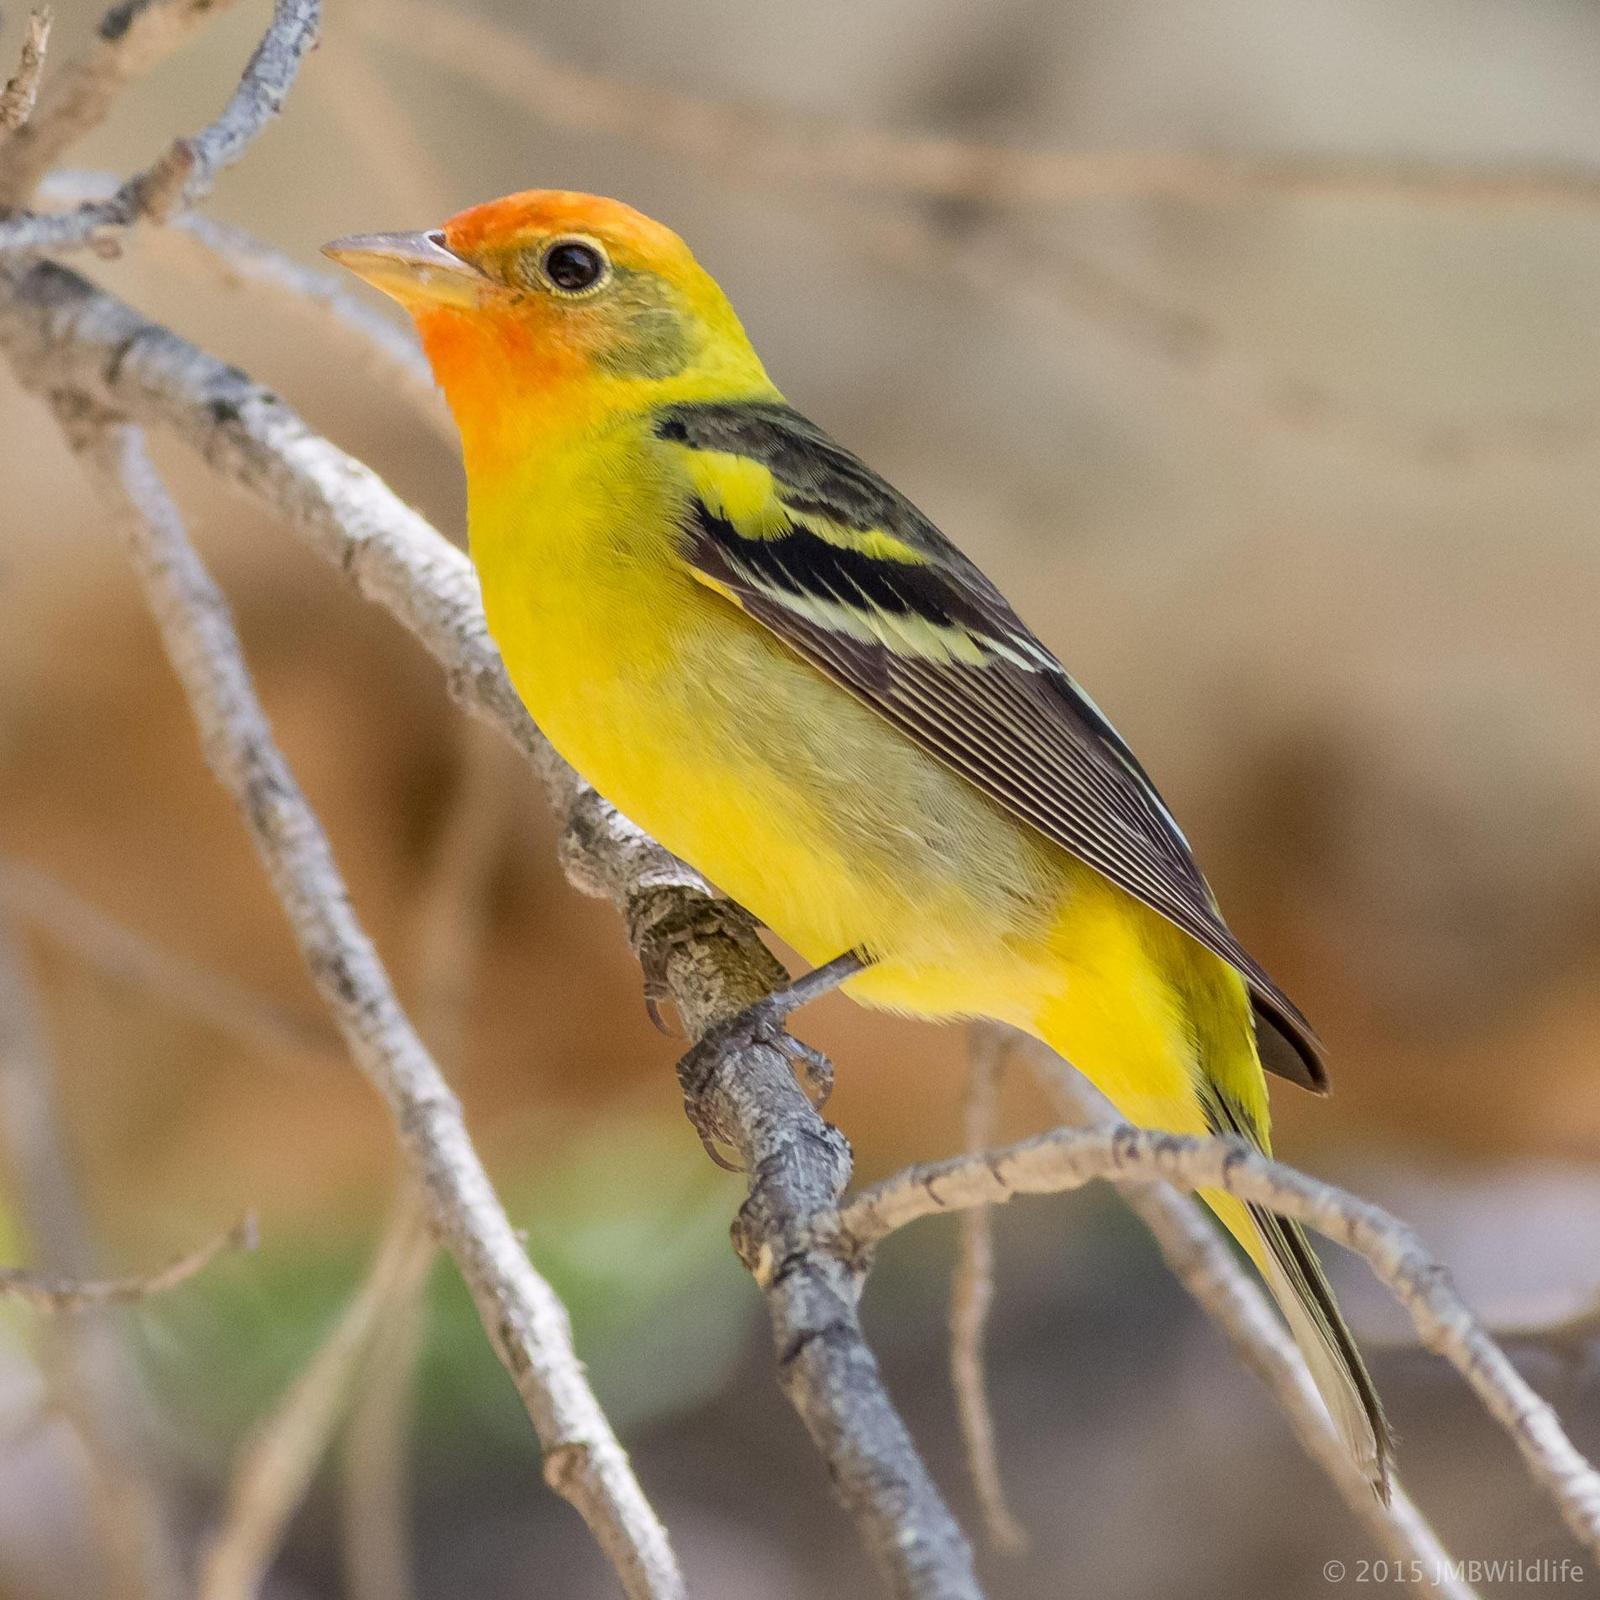 Western Tanager Photo by Jeff Bray